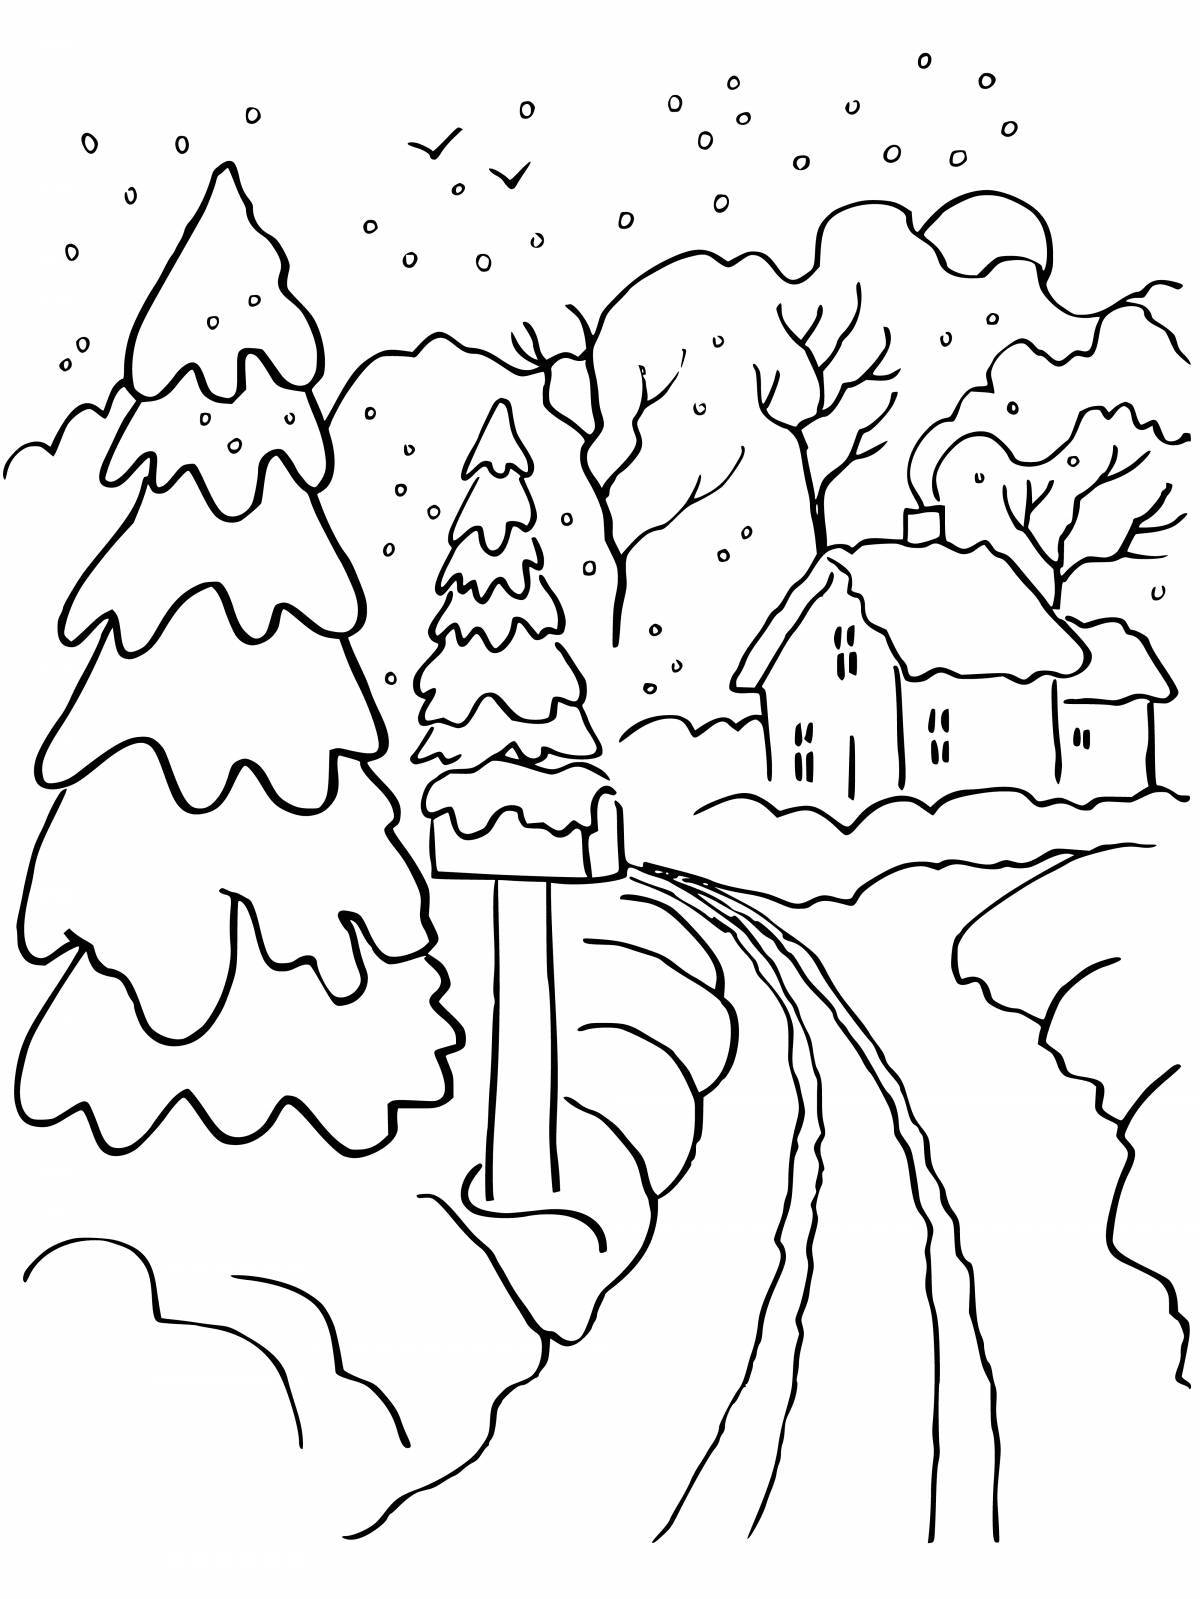 Whimsical winter forest coloring for kids